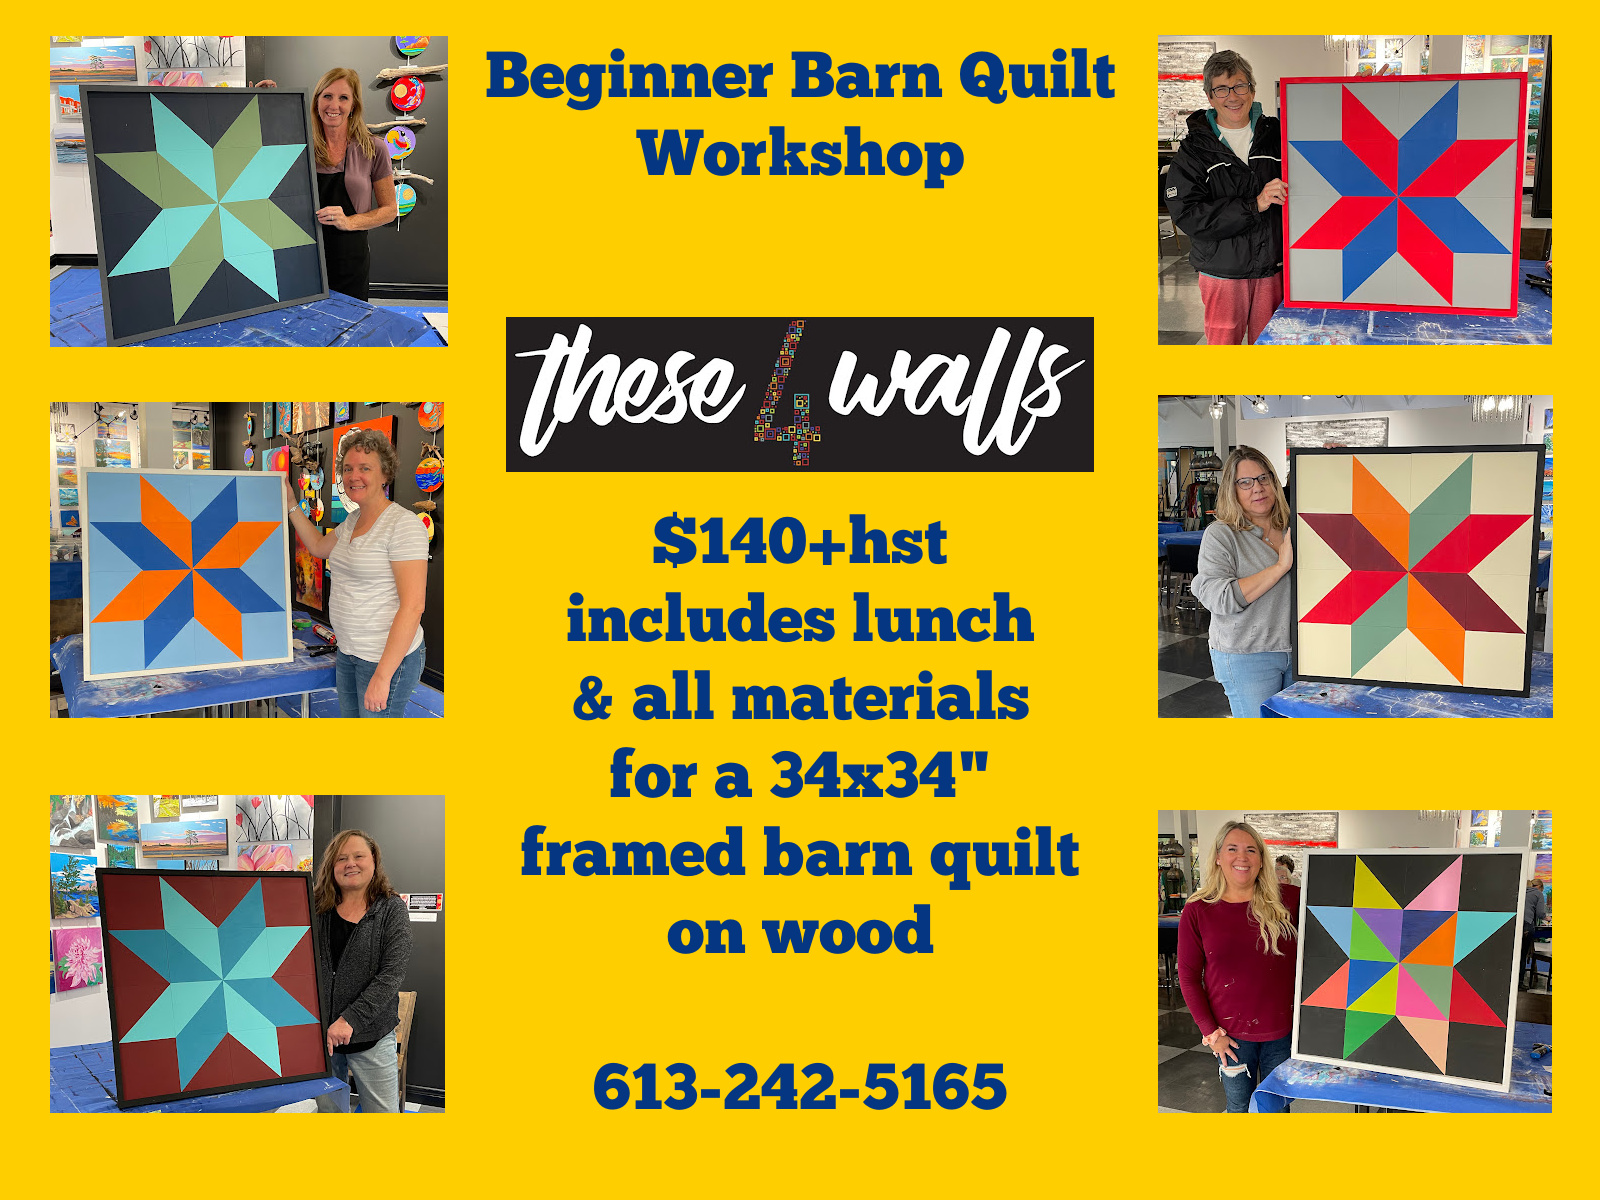 event poster that shows photos of people with their barn quilts.